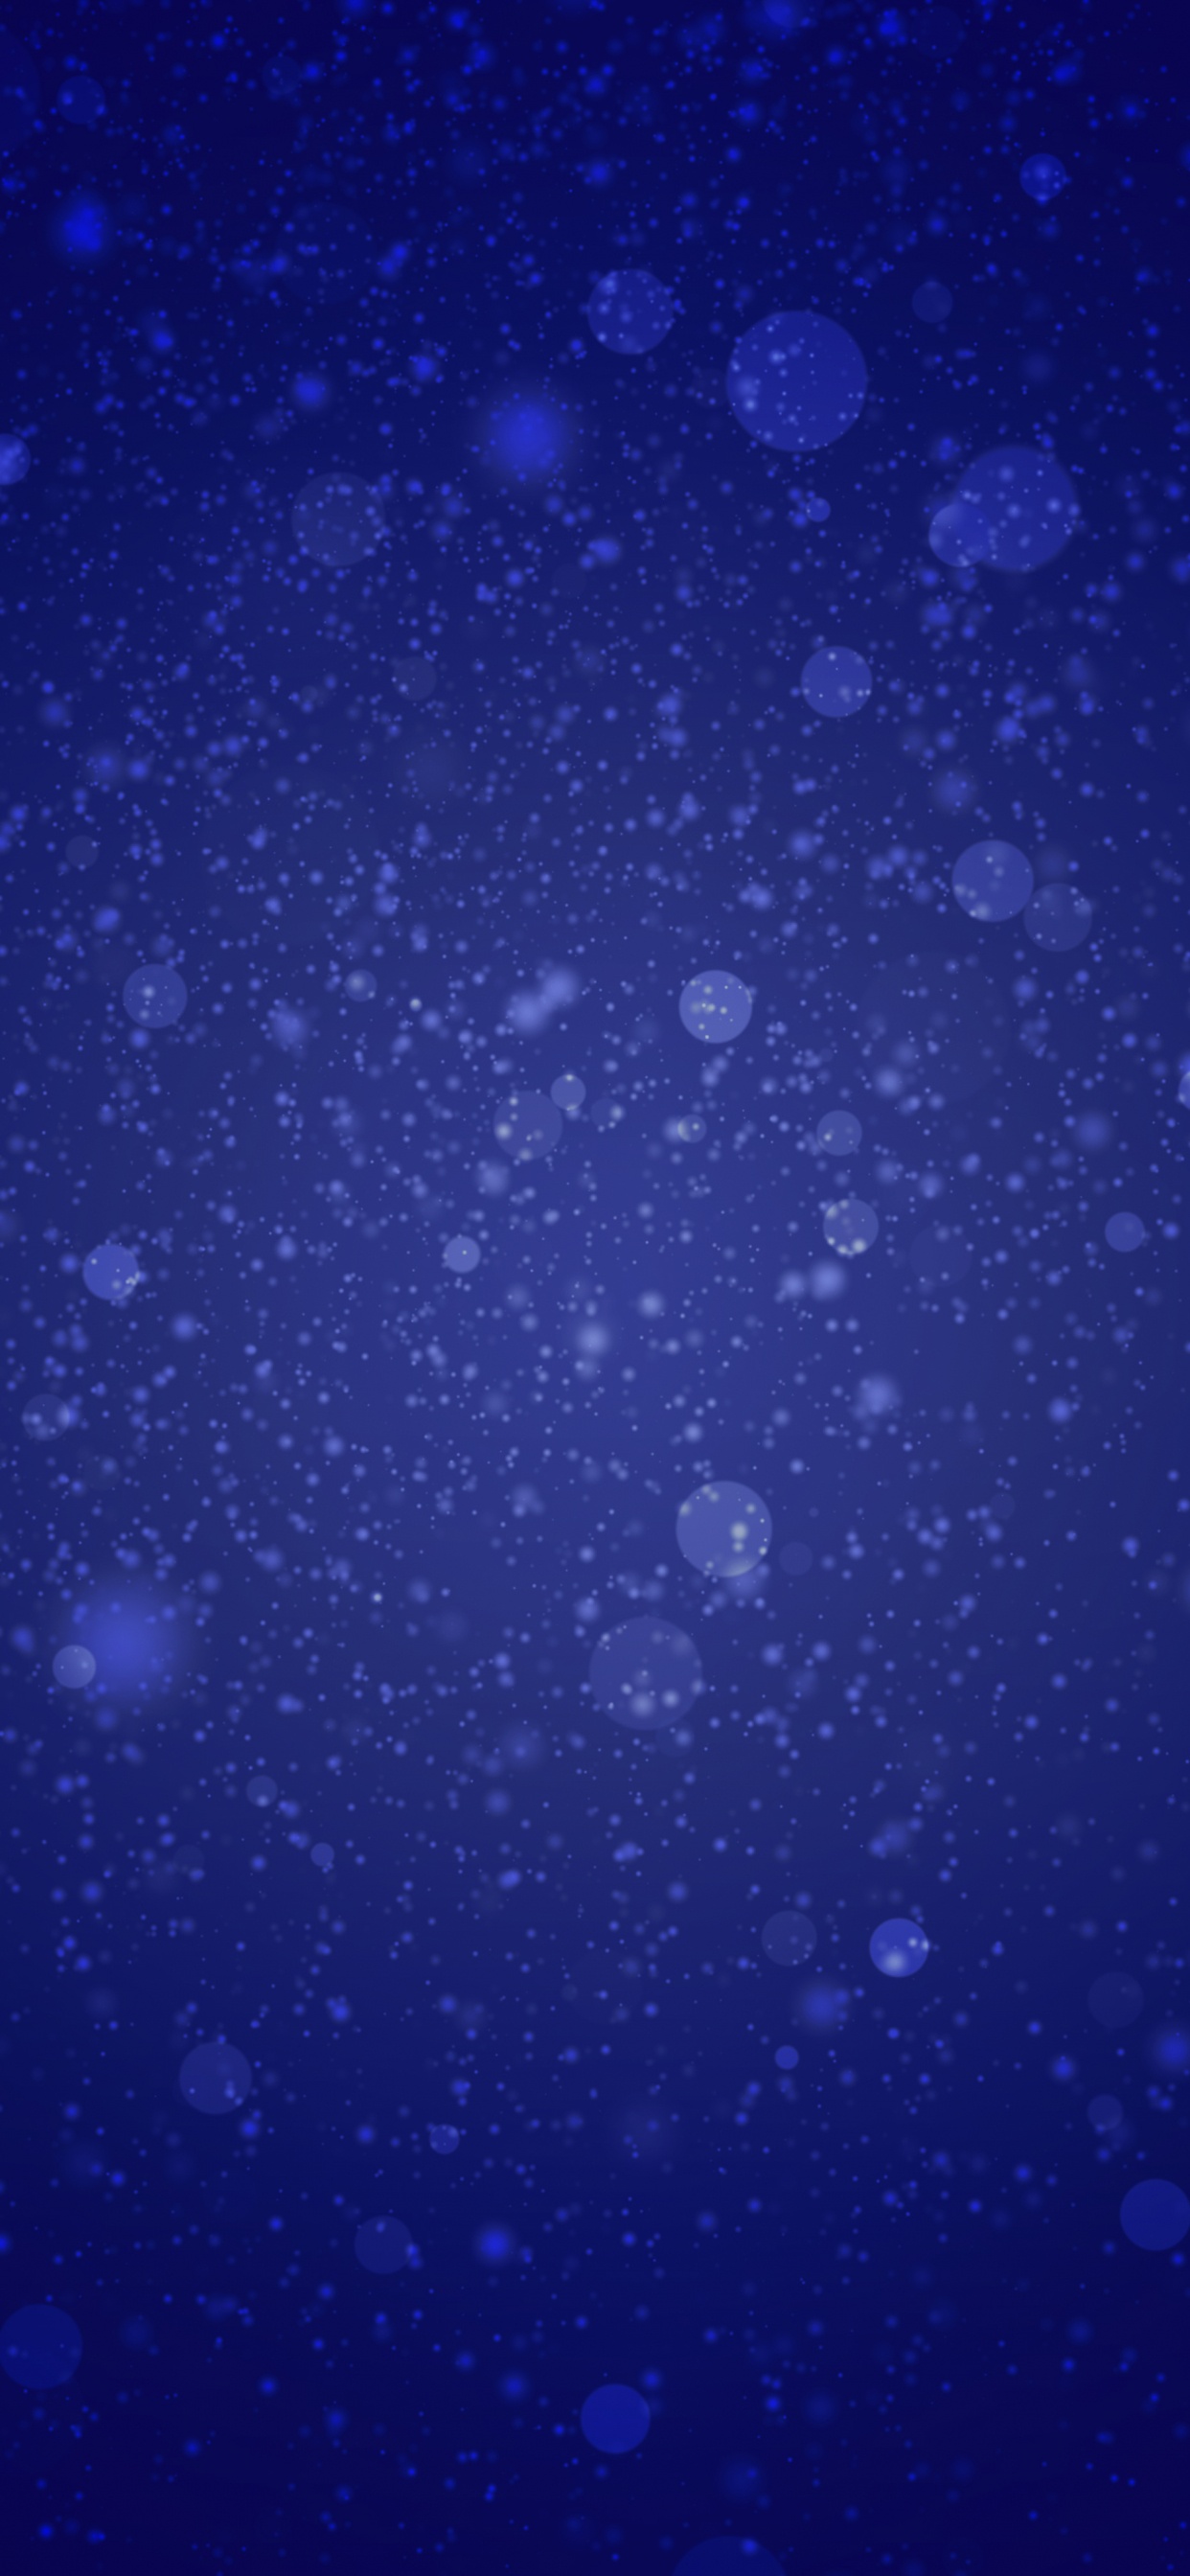 Blue and White Galaxy Illustration. Wallpaper in 1242x2688 Resolution